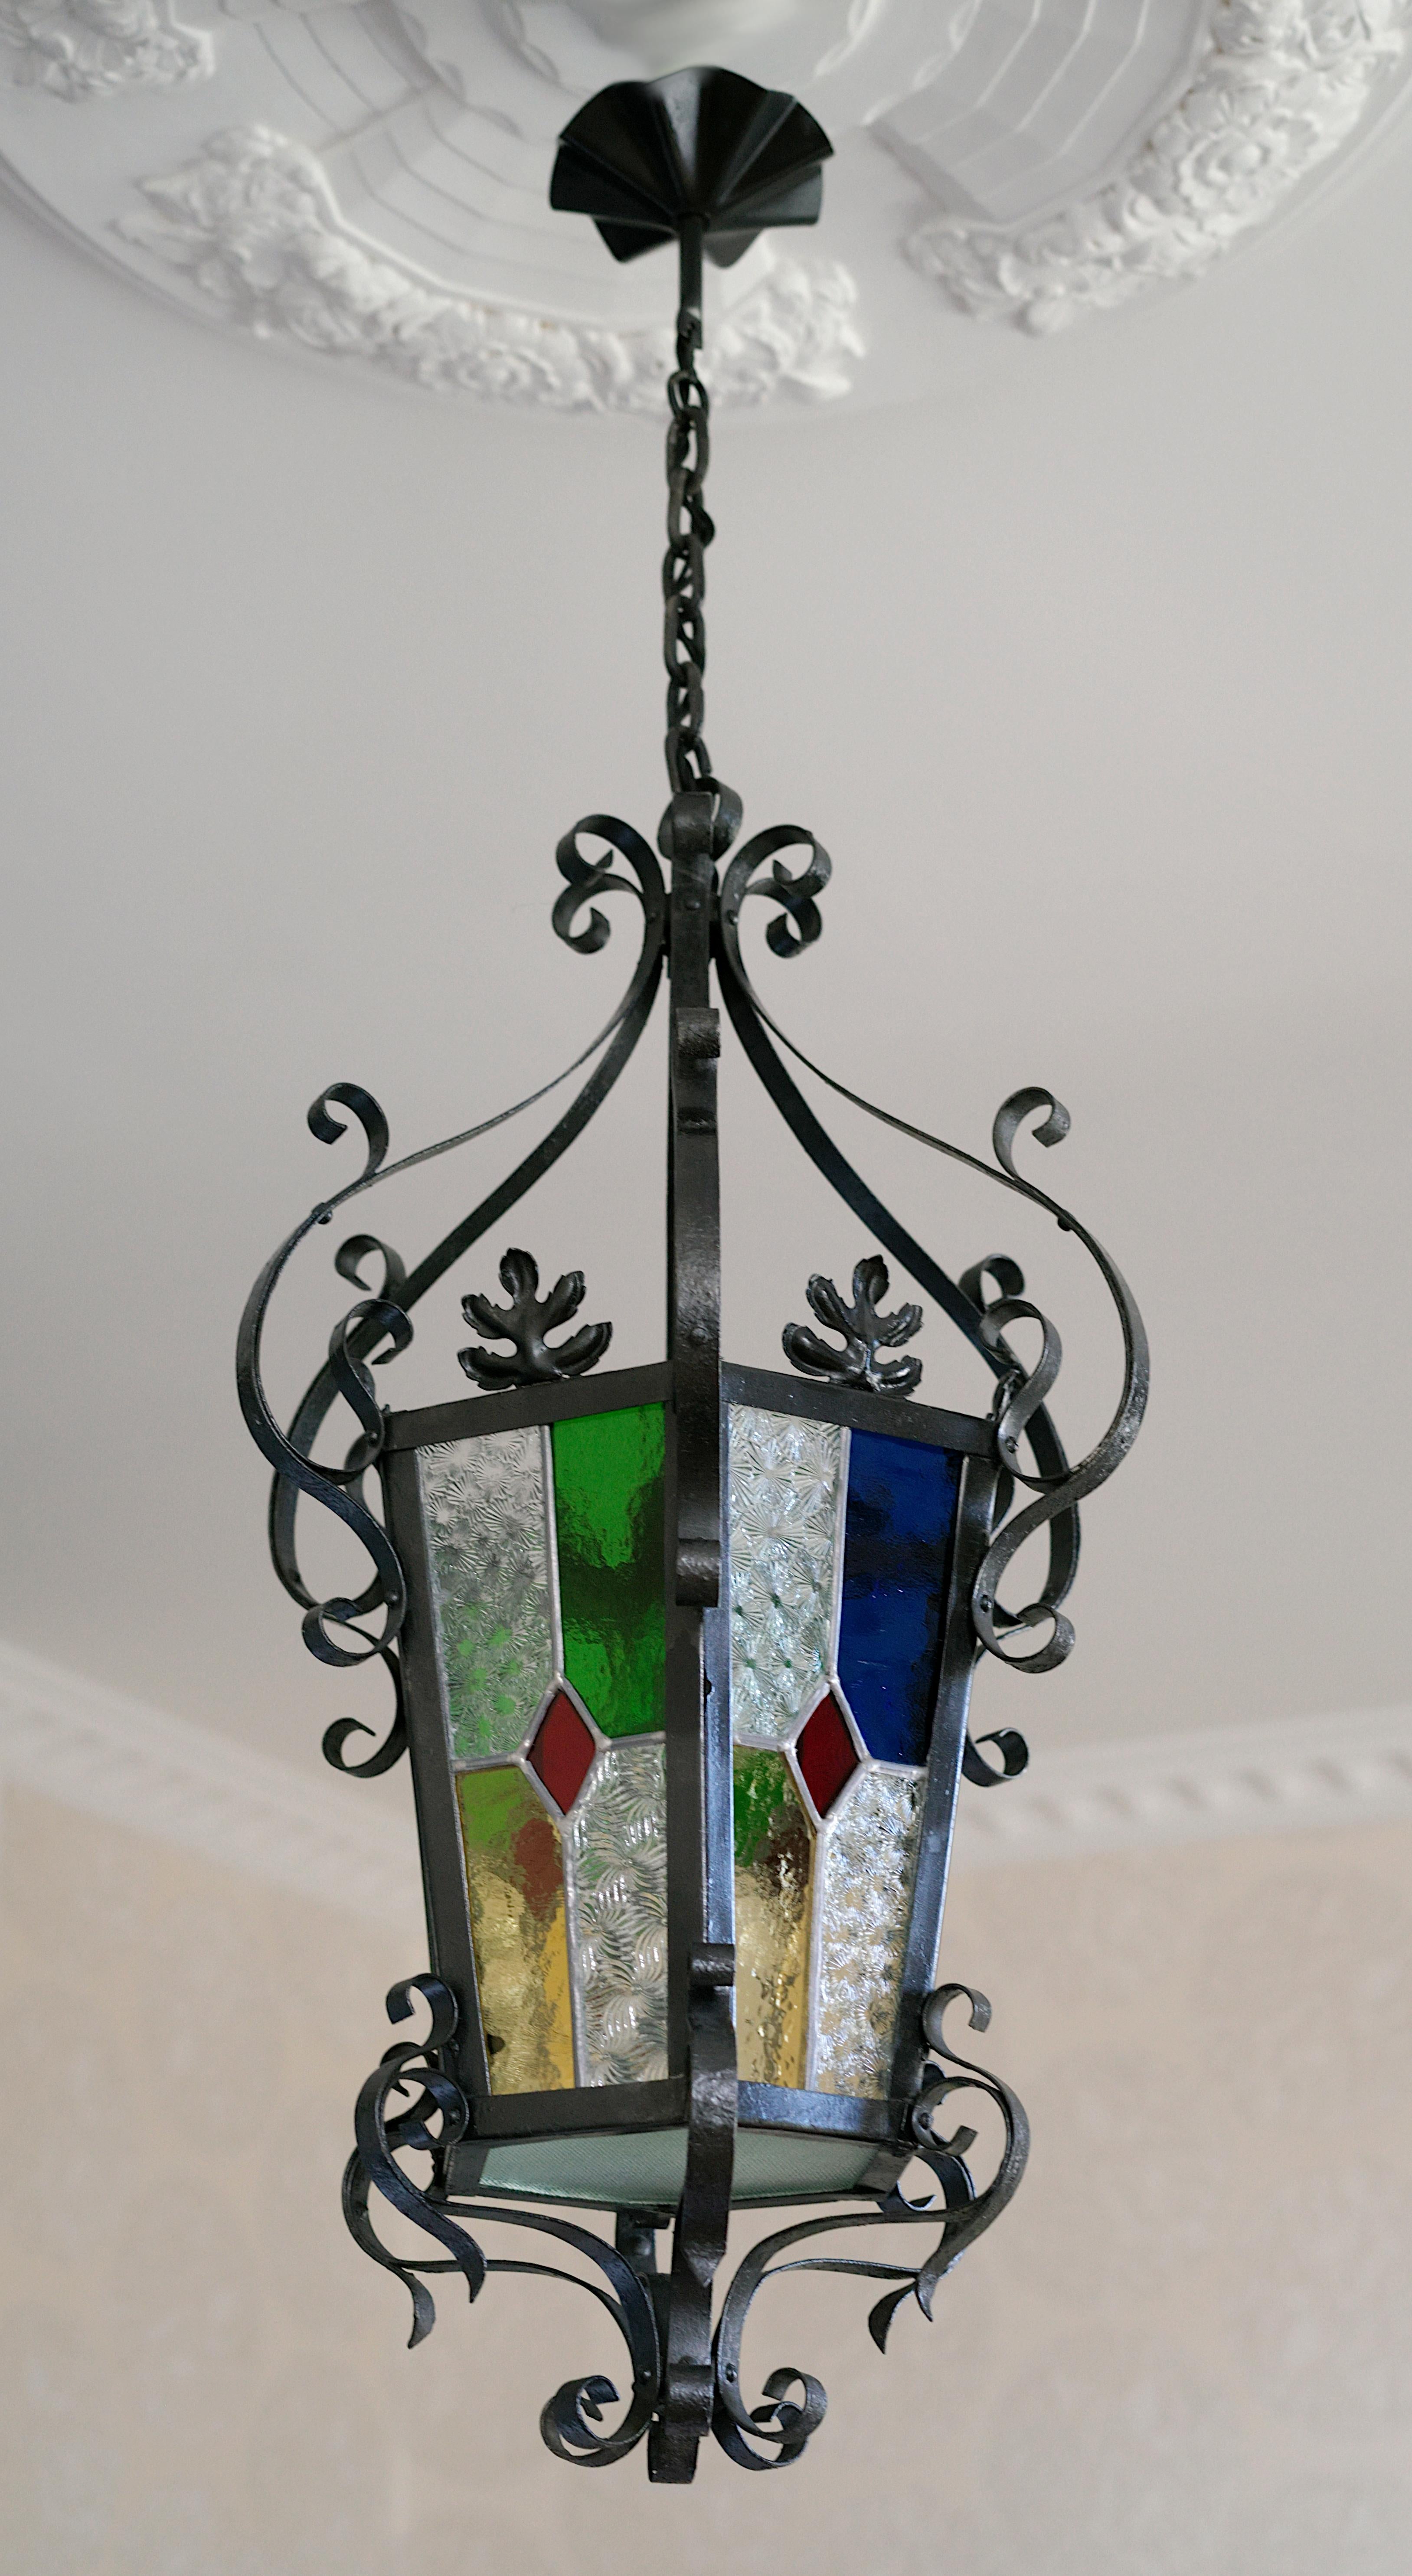 French Art Nouveau Stained-Glass Lantern, 1890-1900 In Excellent Condition For Sale In Saint-Amans-des-Cots, FR